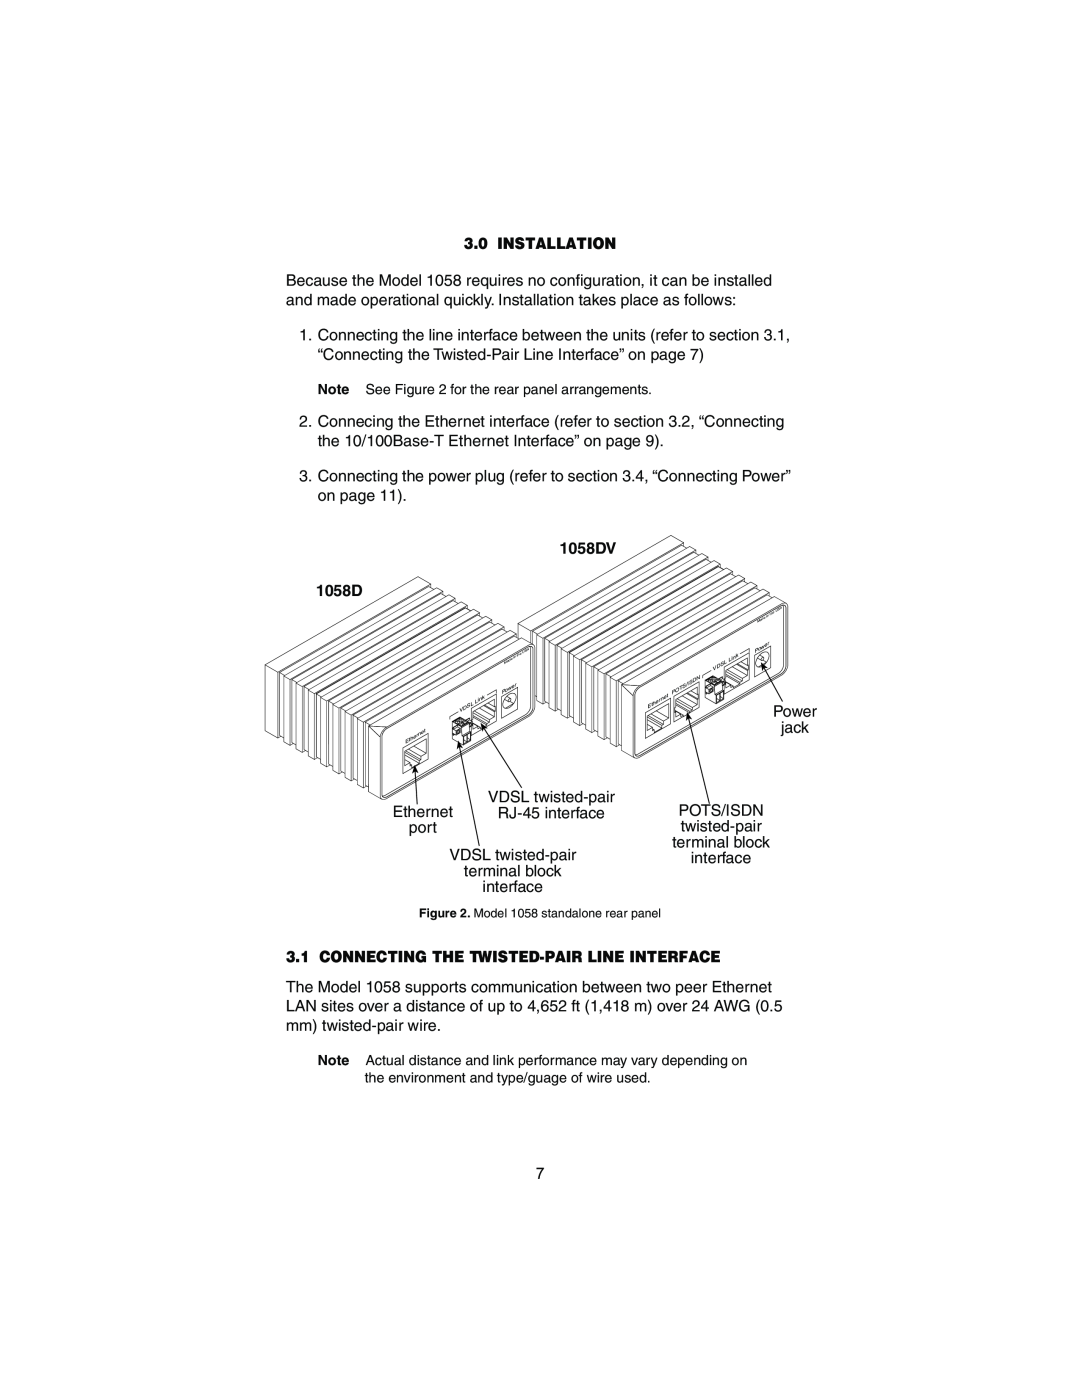 Patton electronic Model 1058 user manual Installation, 1058DV, Connecting The Twisted-Pair Line Interface 